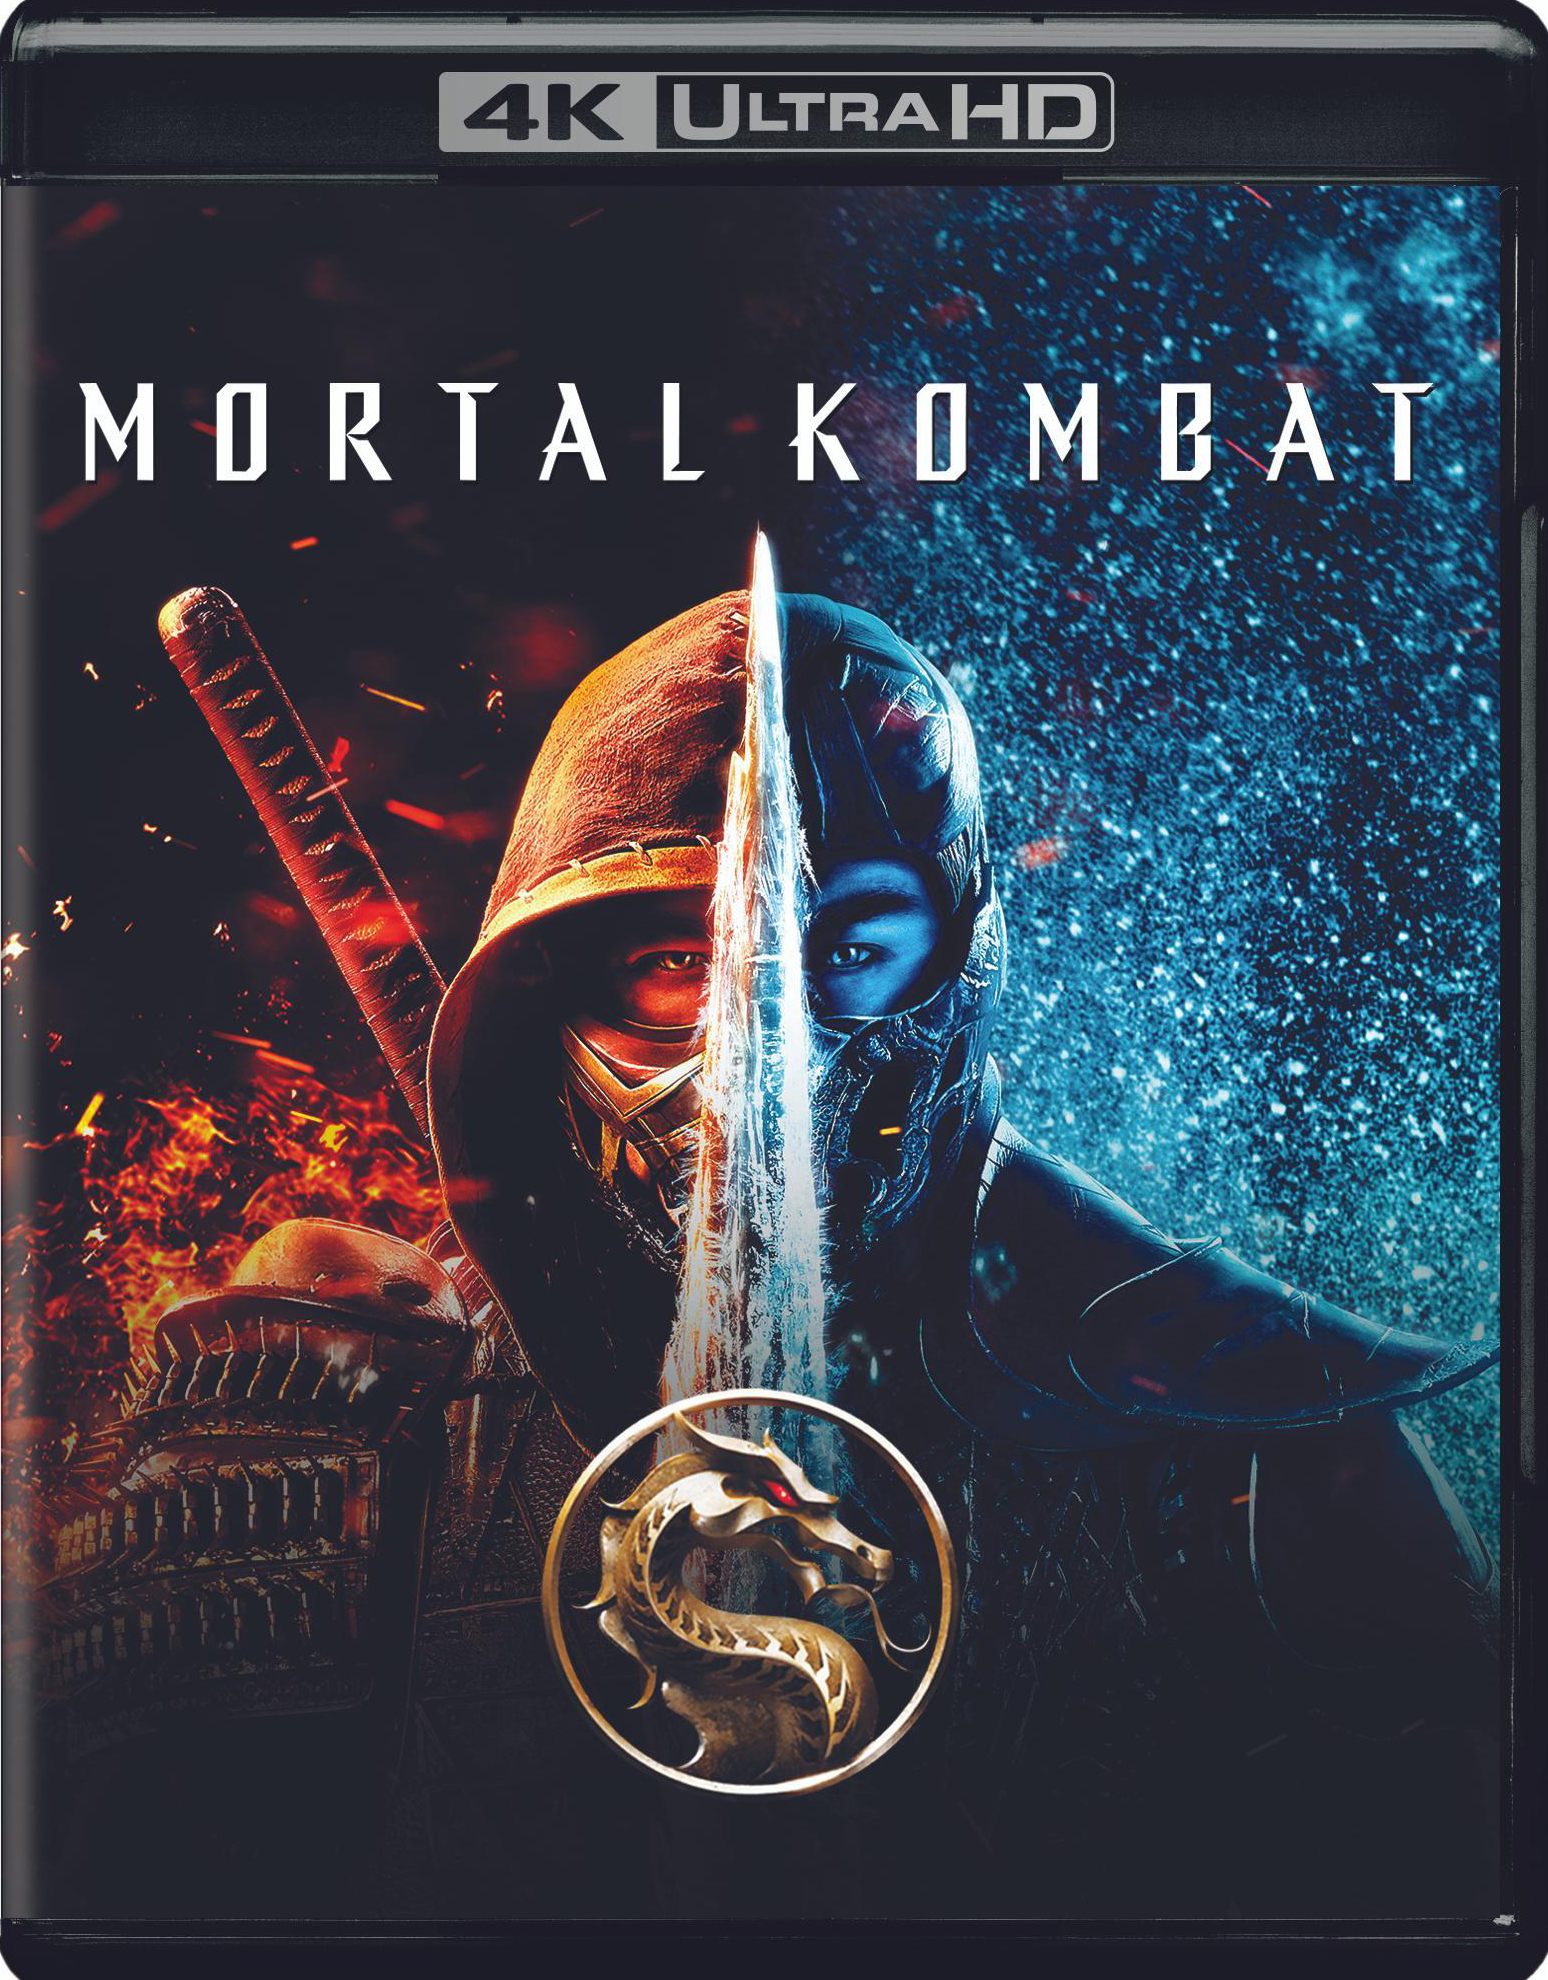 Mortal Kombat 11' Mobile Kombat Kast: Start Time and How to Watch Online